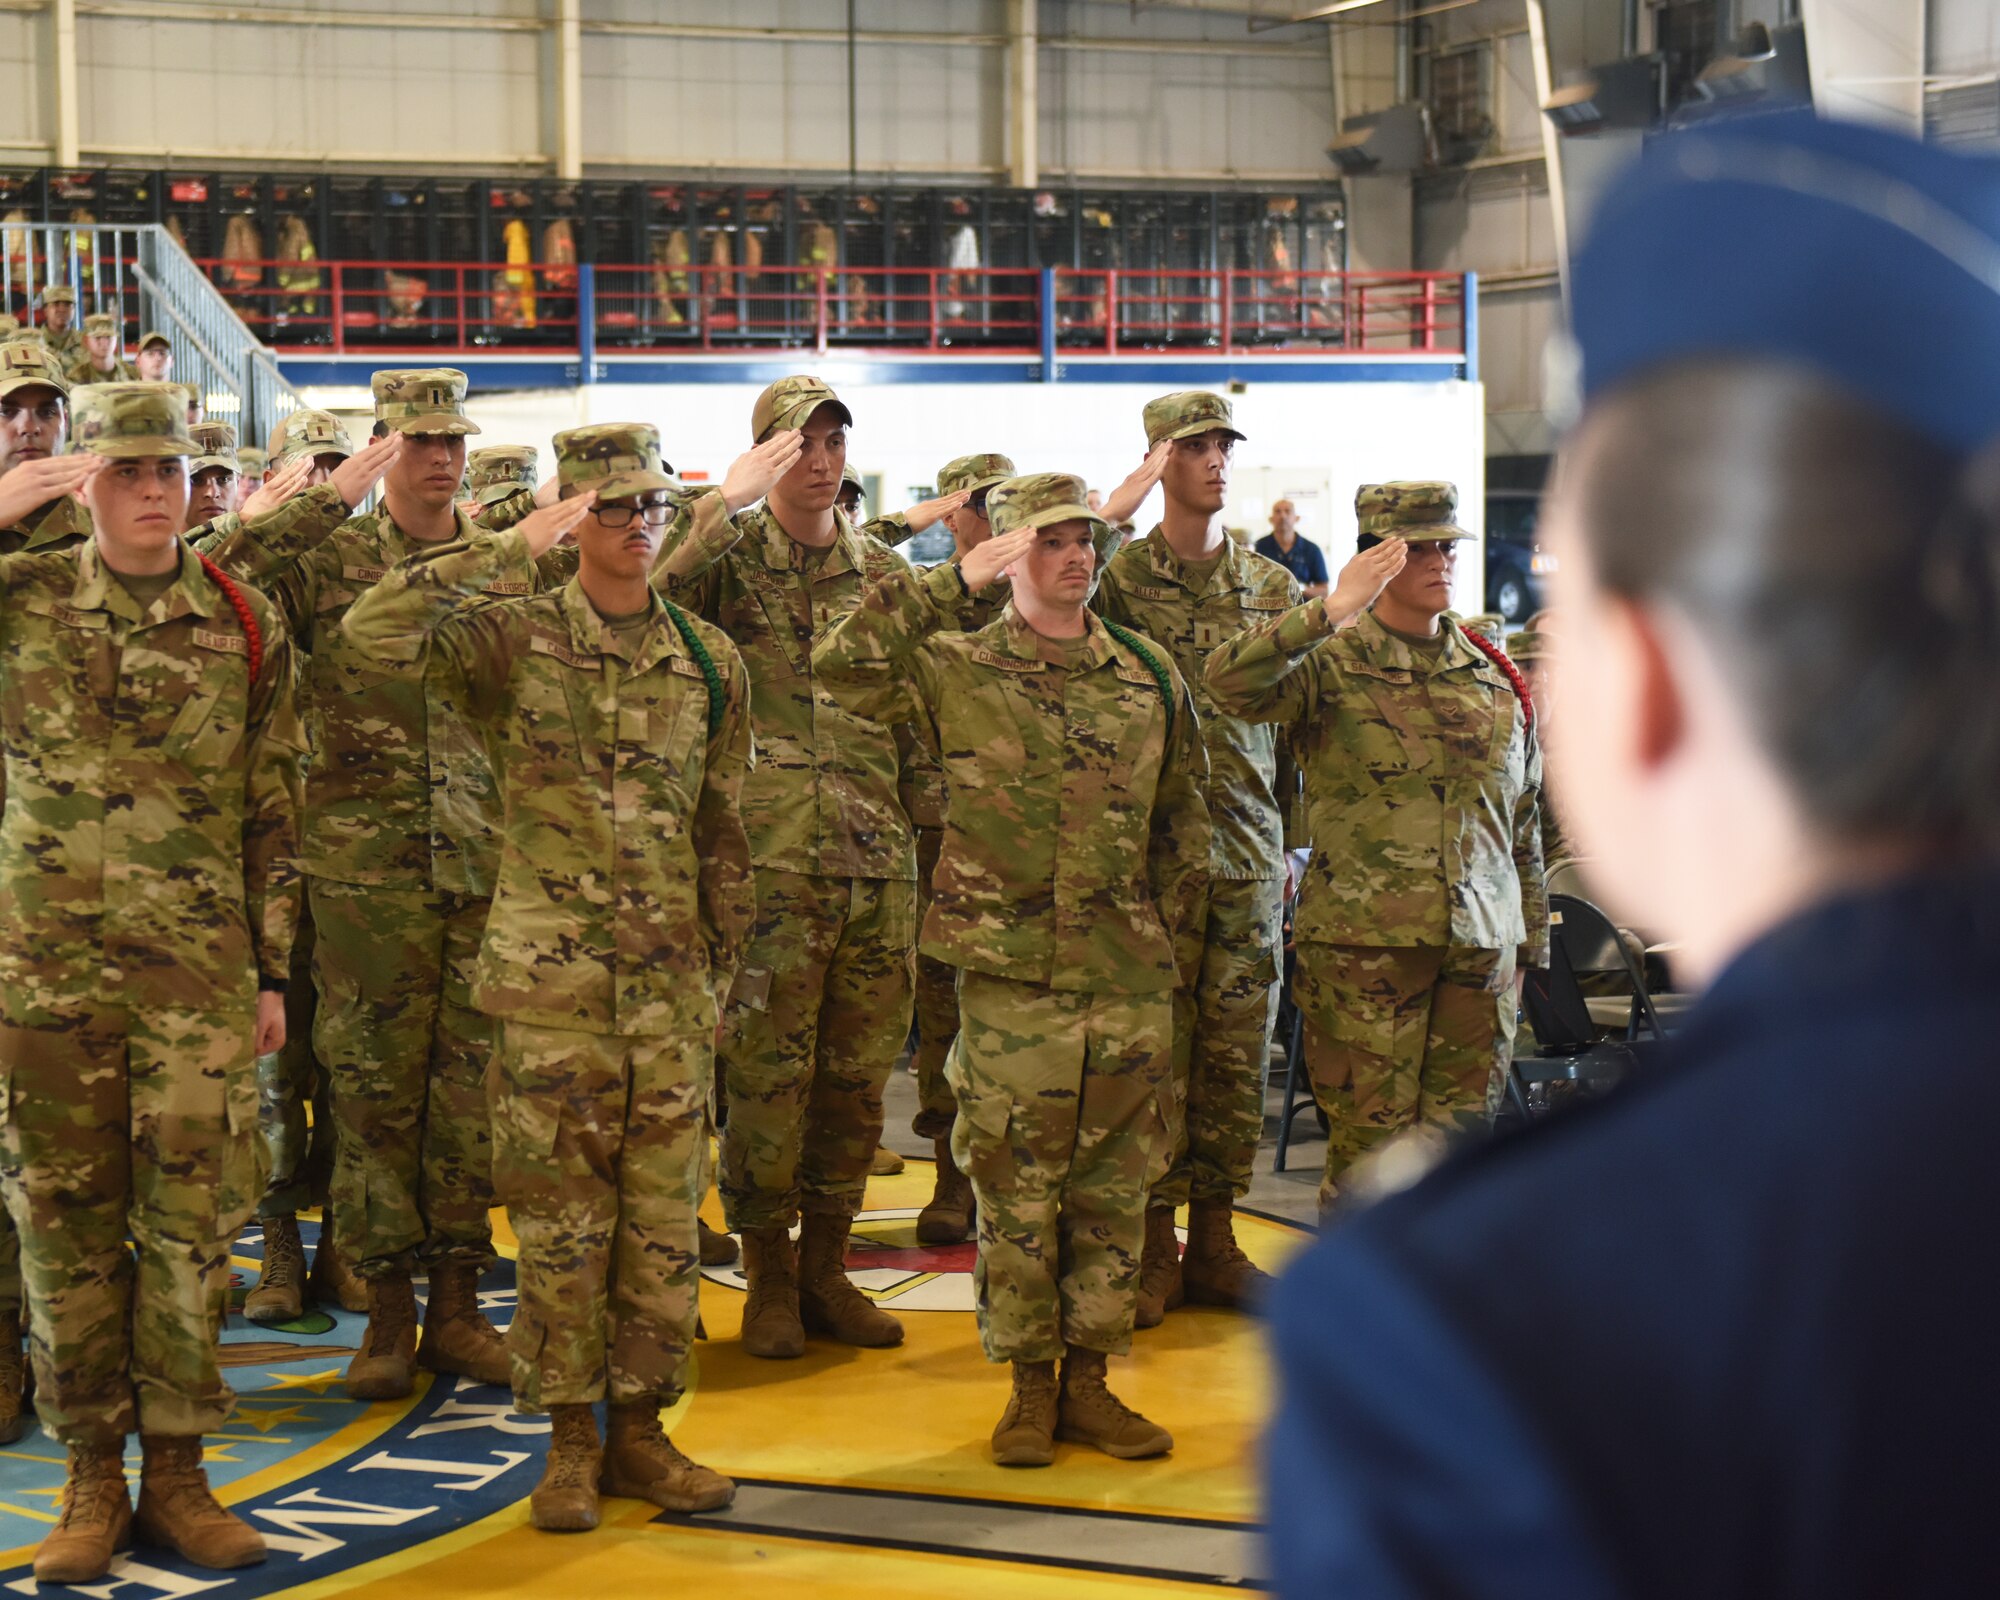 Members of the 315th Training Squadron salute U.S. Air Force Lt. Col. Liane Zivitski, 315th TRS incoming commander, during the 315th TRS change of command ceremony at Goodfellow Air Force Base, Texas, June 10, 2022. Zivitski previously served as the chief, operations branch, intelligence, surveillance, and reconnaissance operations and integrations division, joint staff J-3, at the Pentagon, Arlington, Virginia. (U.S. Air Force photo by Airman 1st Class Zachary Heimbuch)